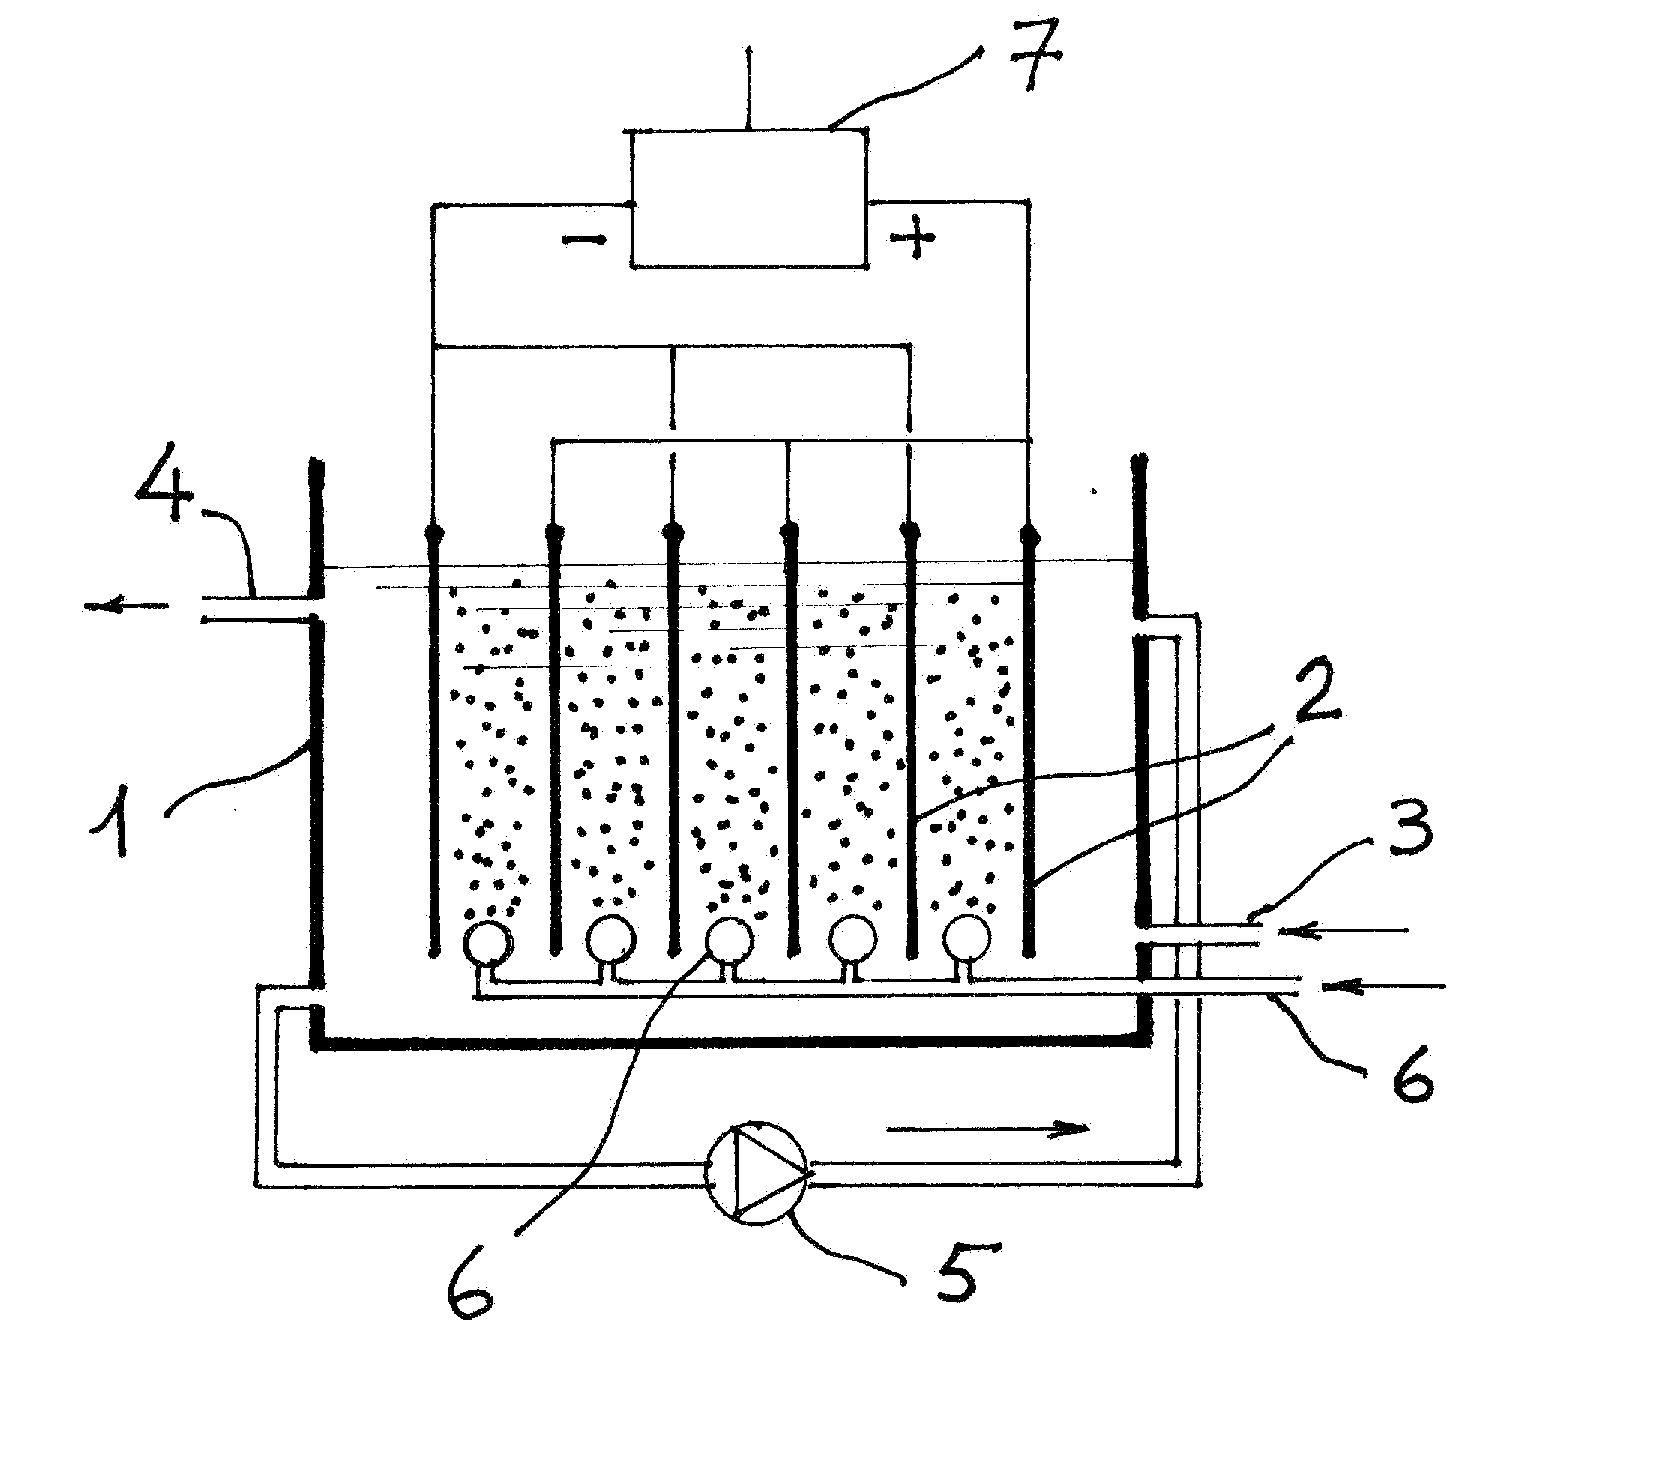 Process and method for the removal of arsenic from water